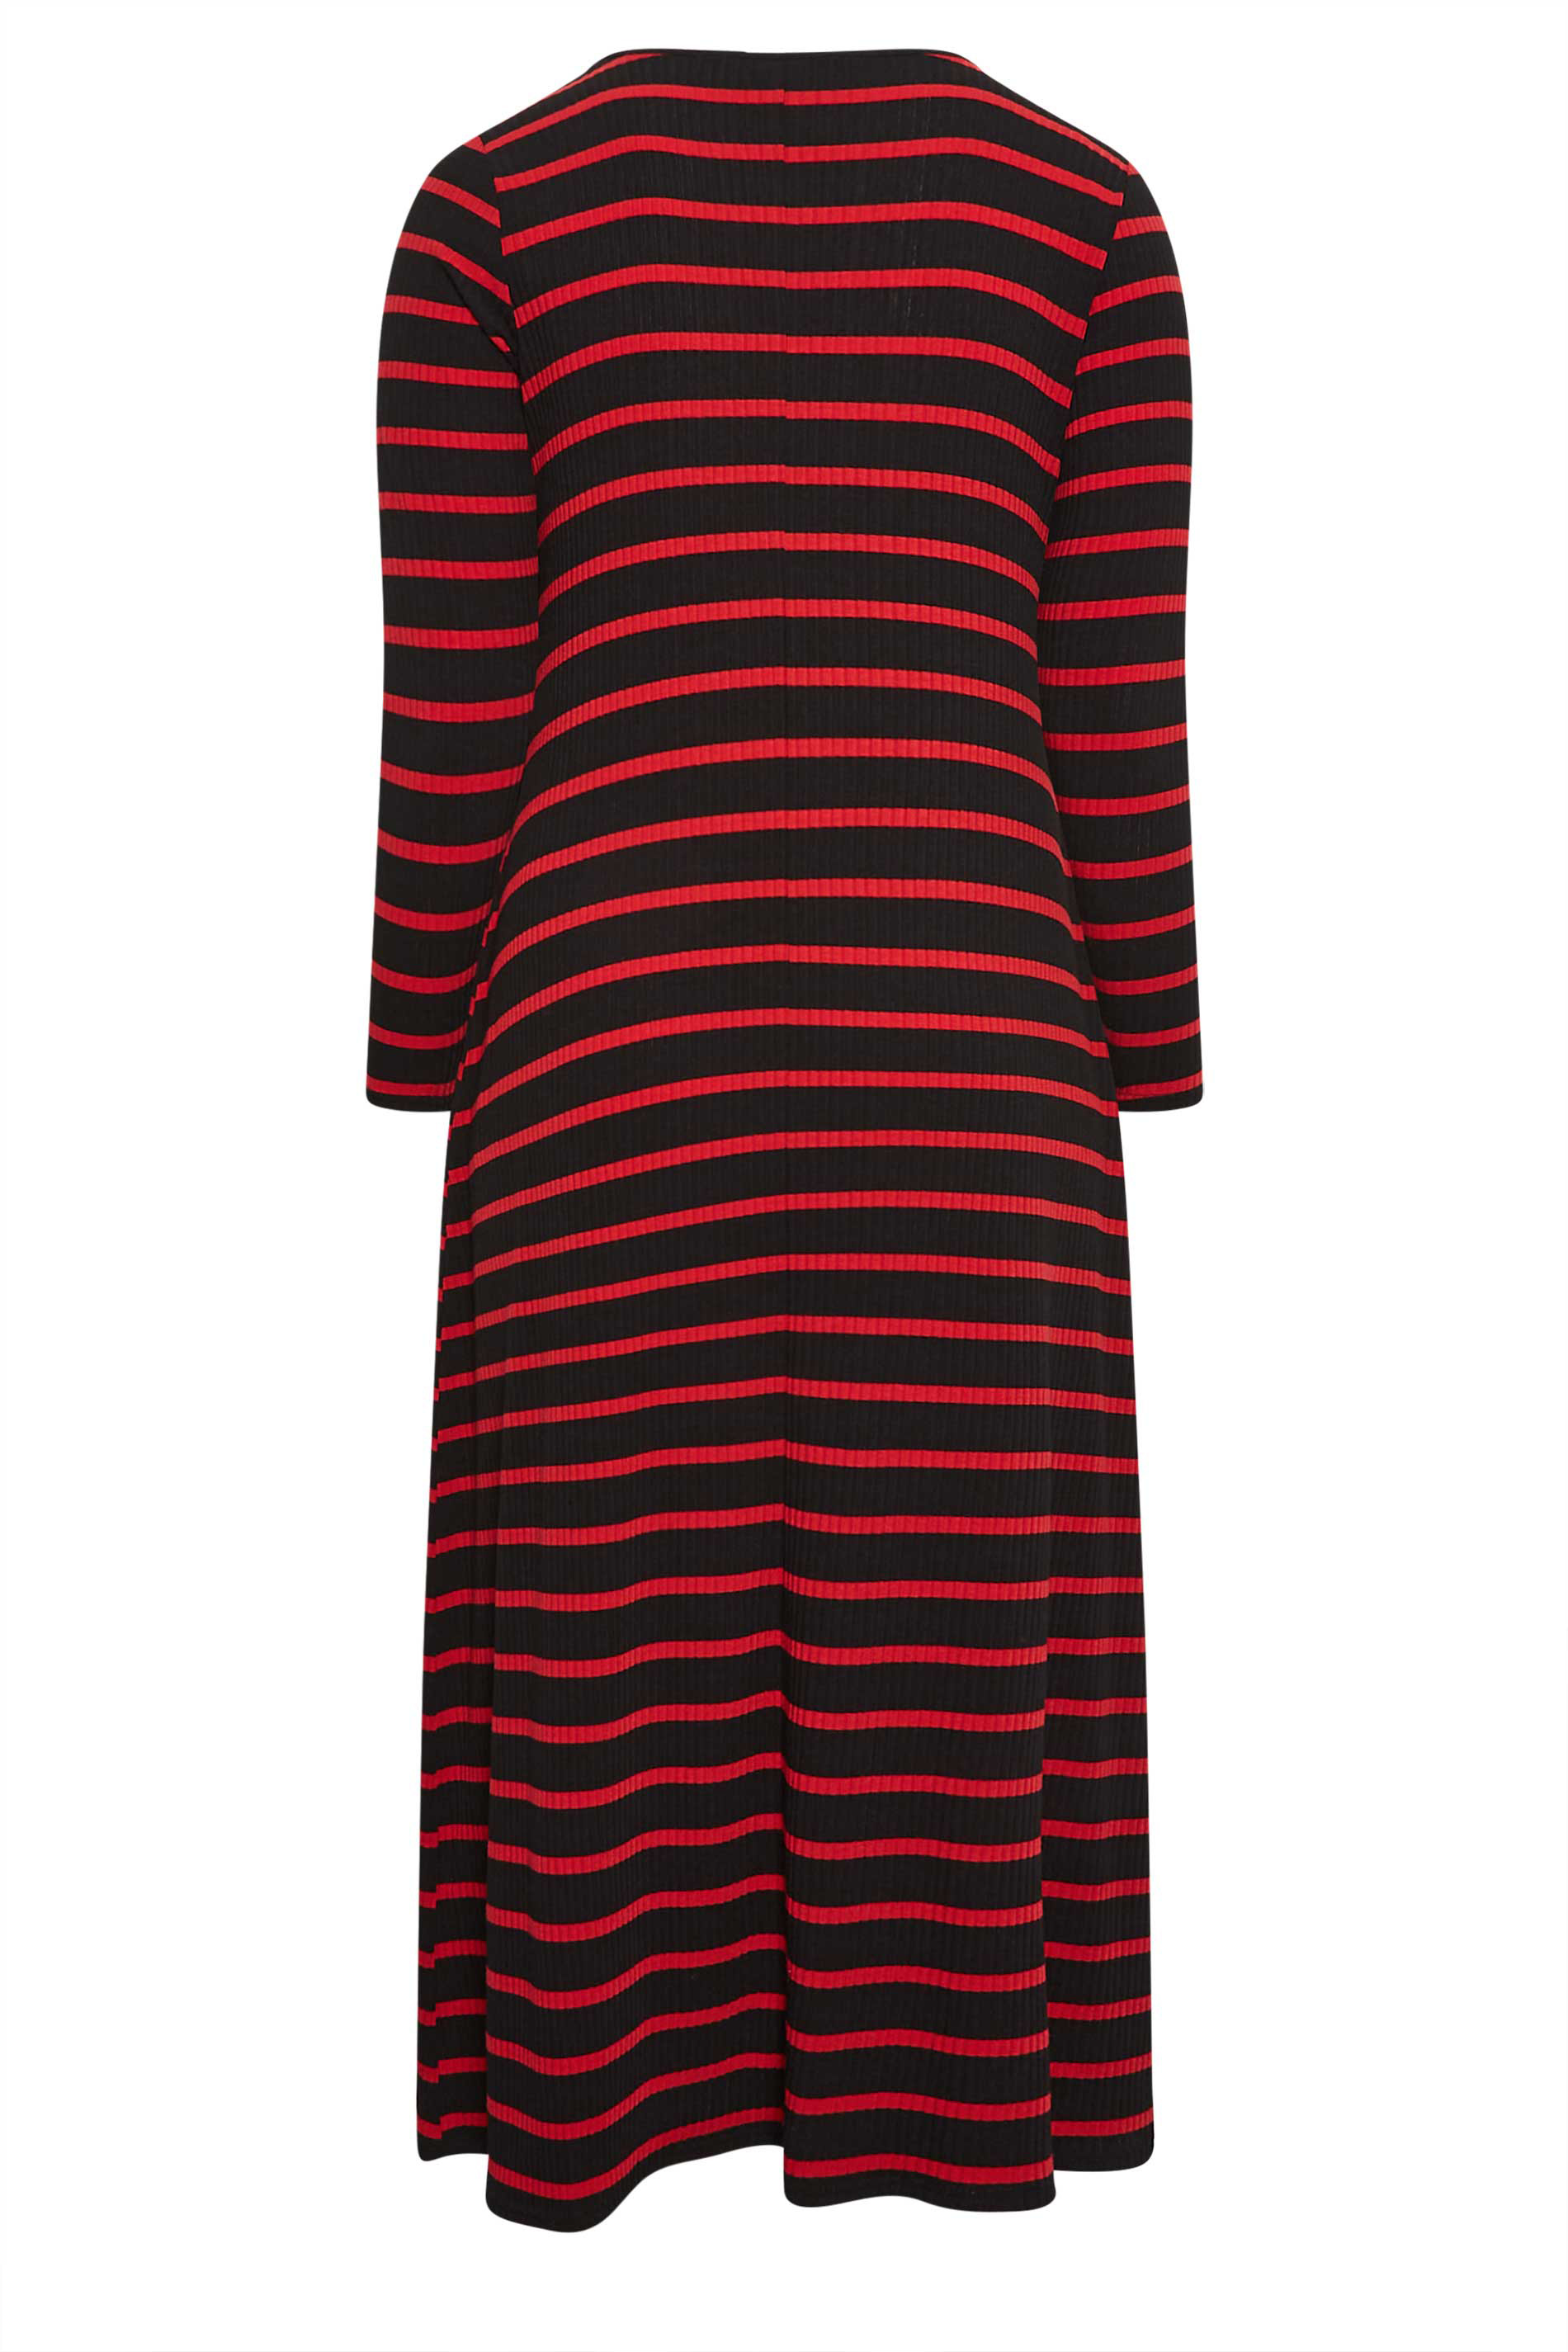 YOURS Curve Red Striped Ribbed Long Sleeve Swing Maxi Dress | Yours Clothing